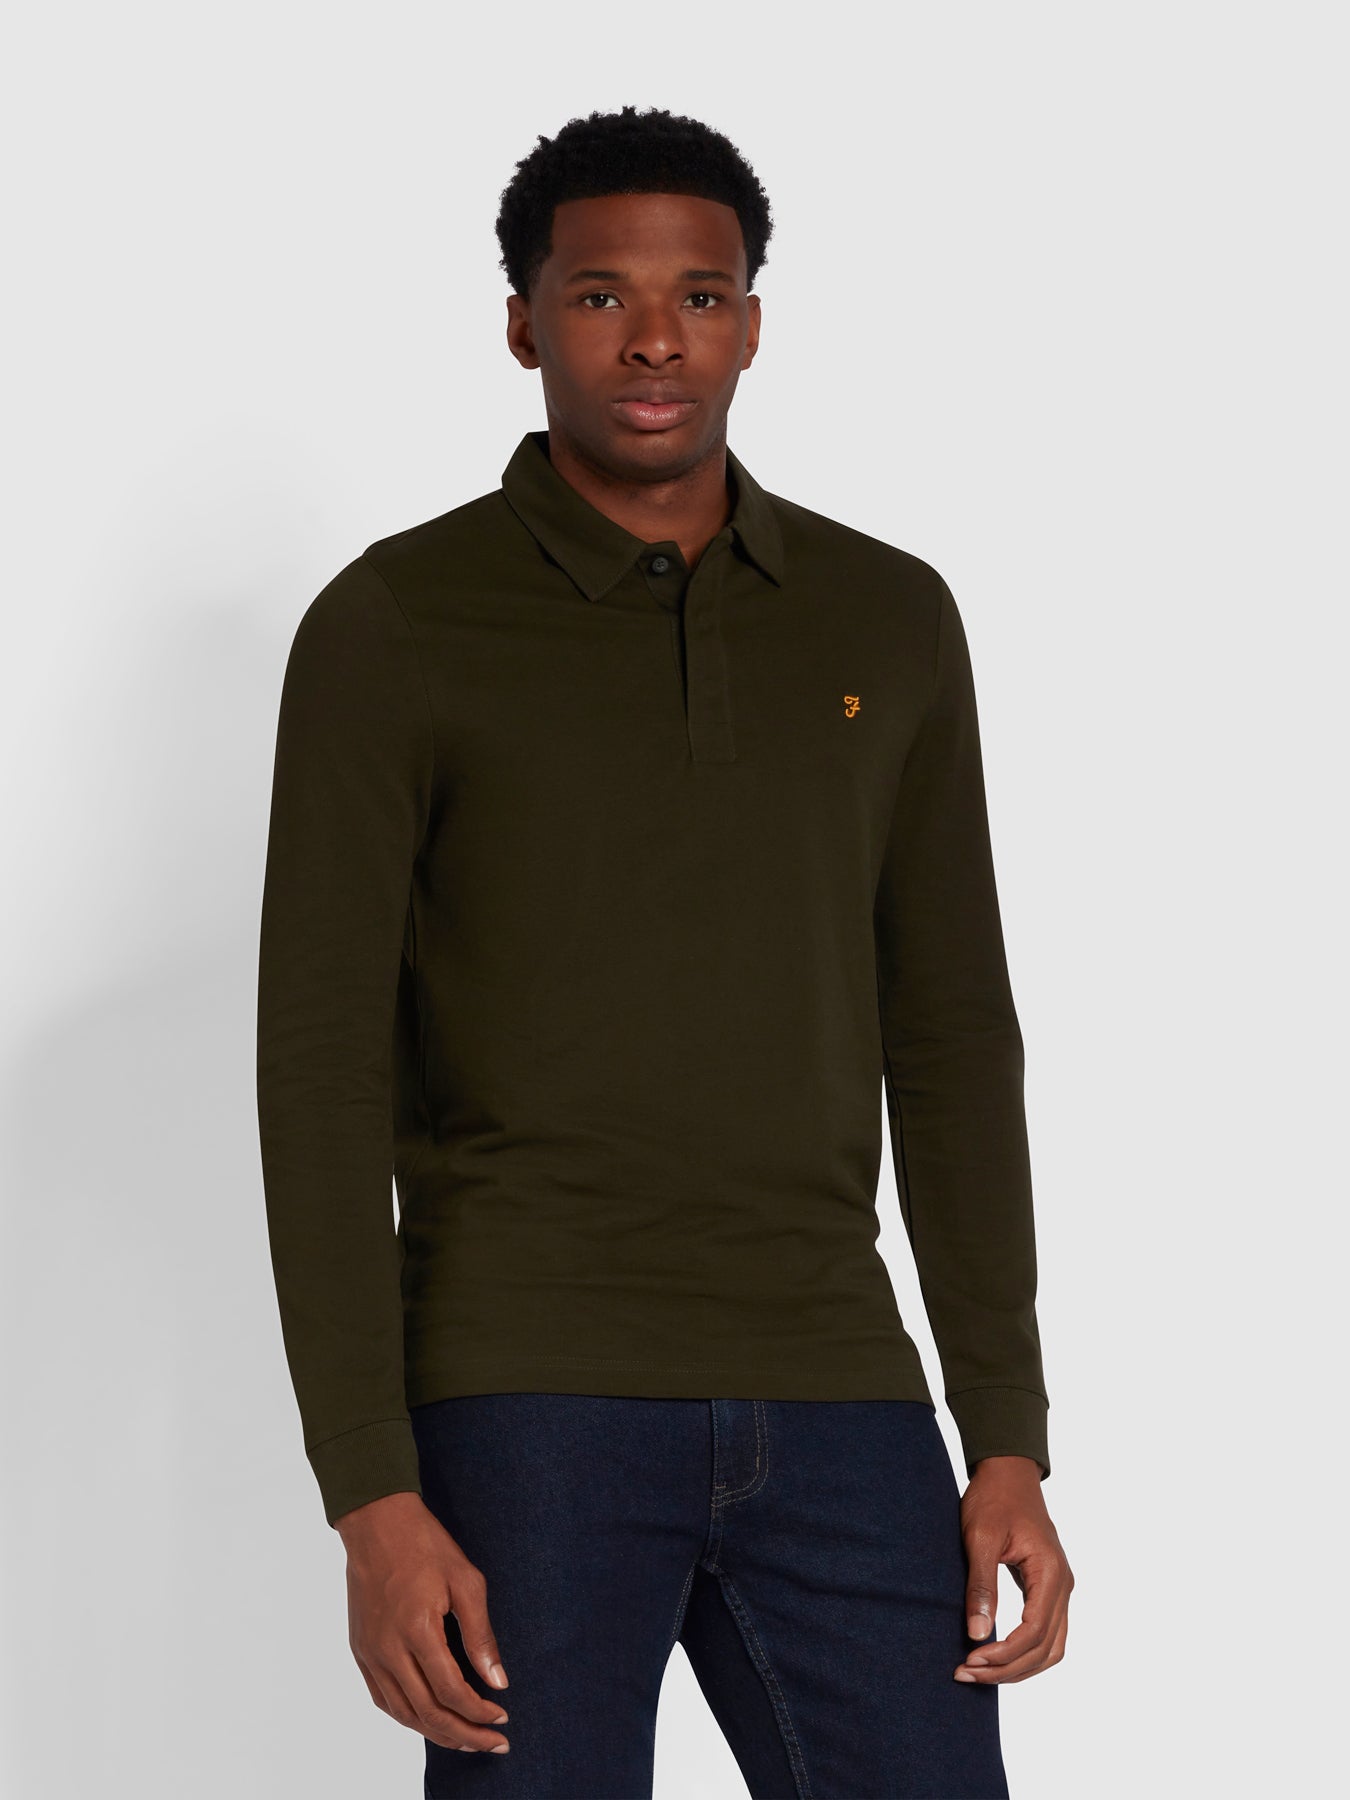 View Haslam Slim Fit Polo Organic Cotton Polo Shirt In Evergreen information